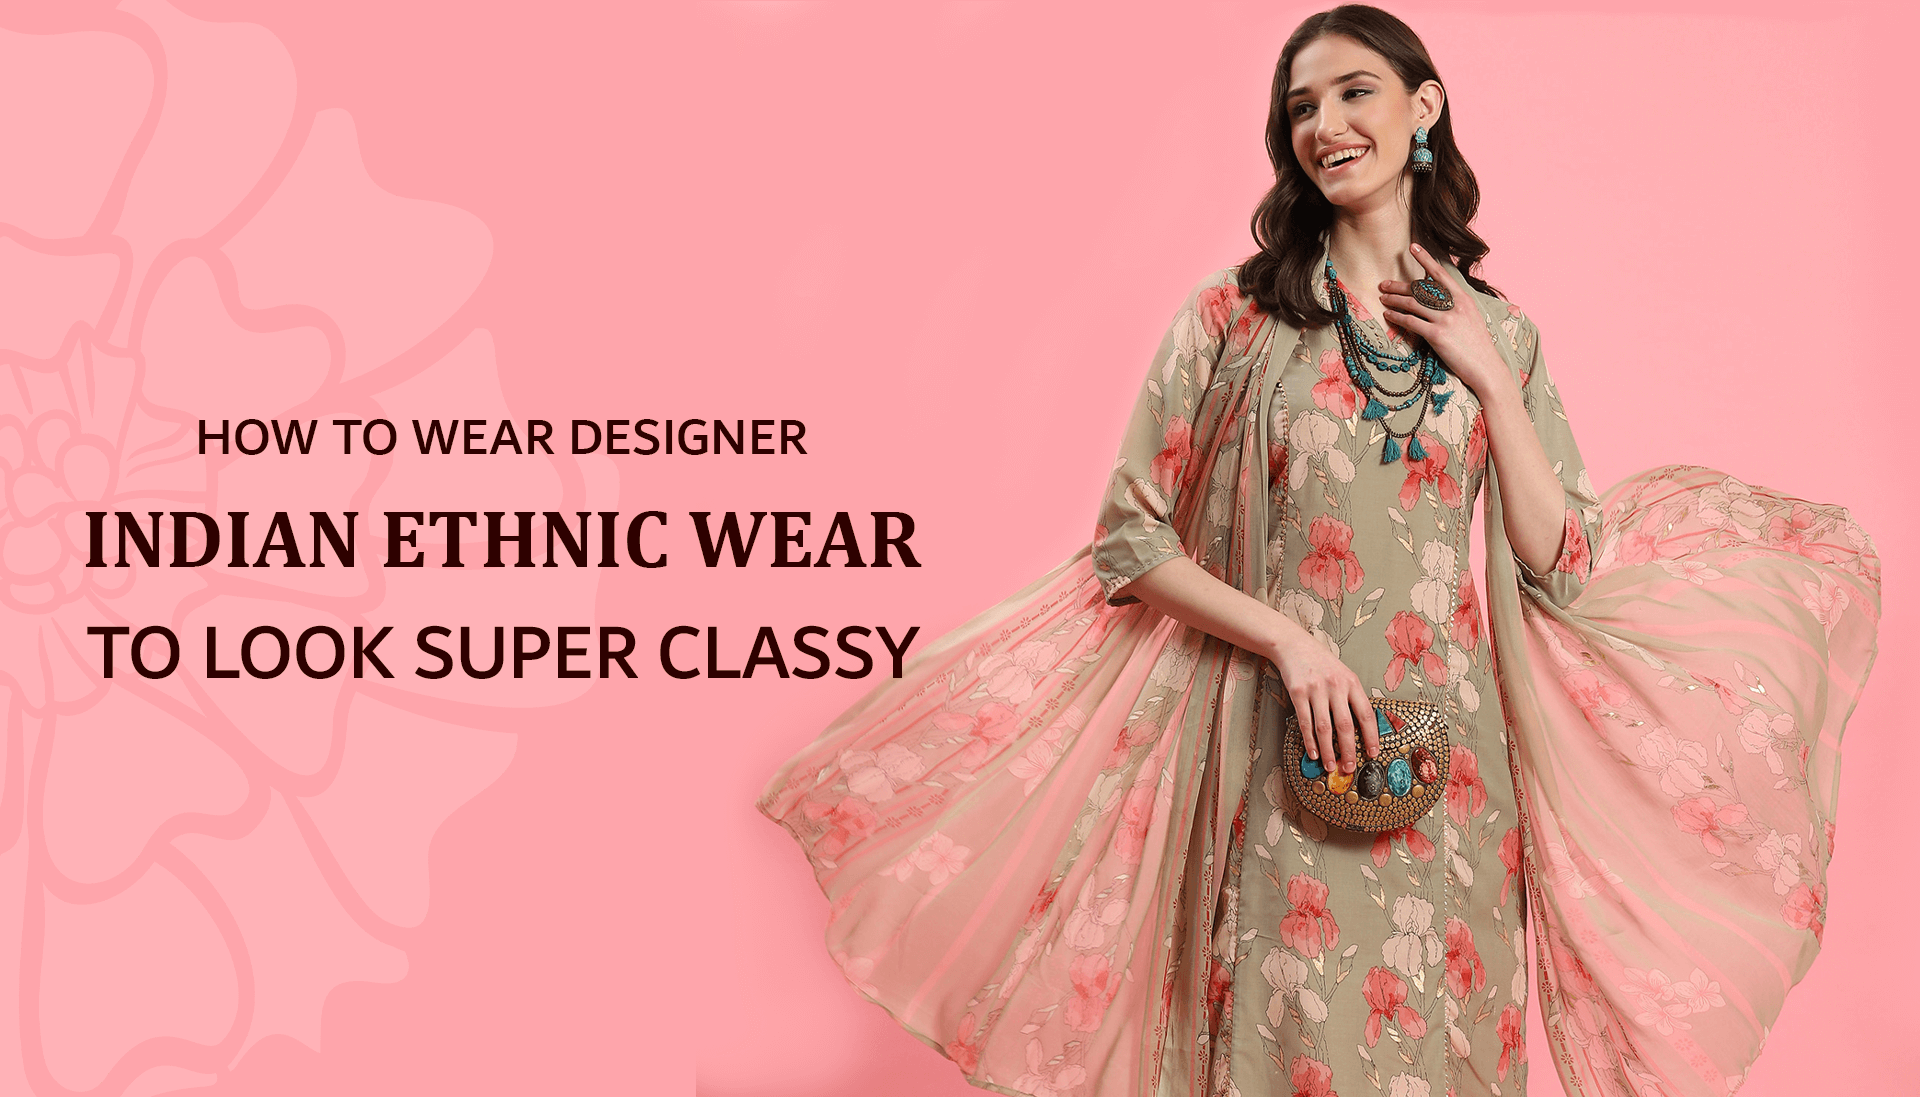 Top 5 Designer Indian Ethnic Wear from Shree, Read Blog